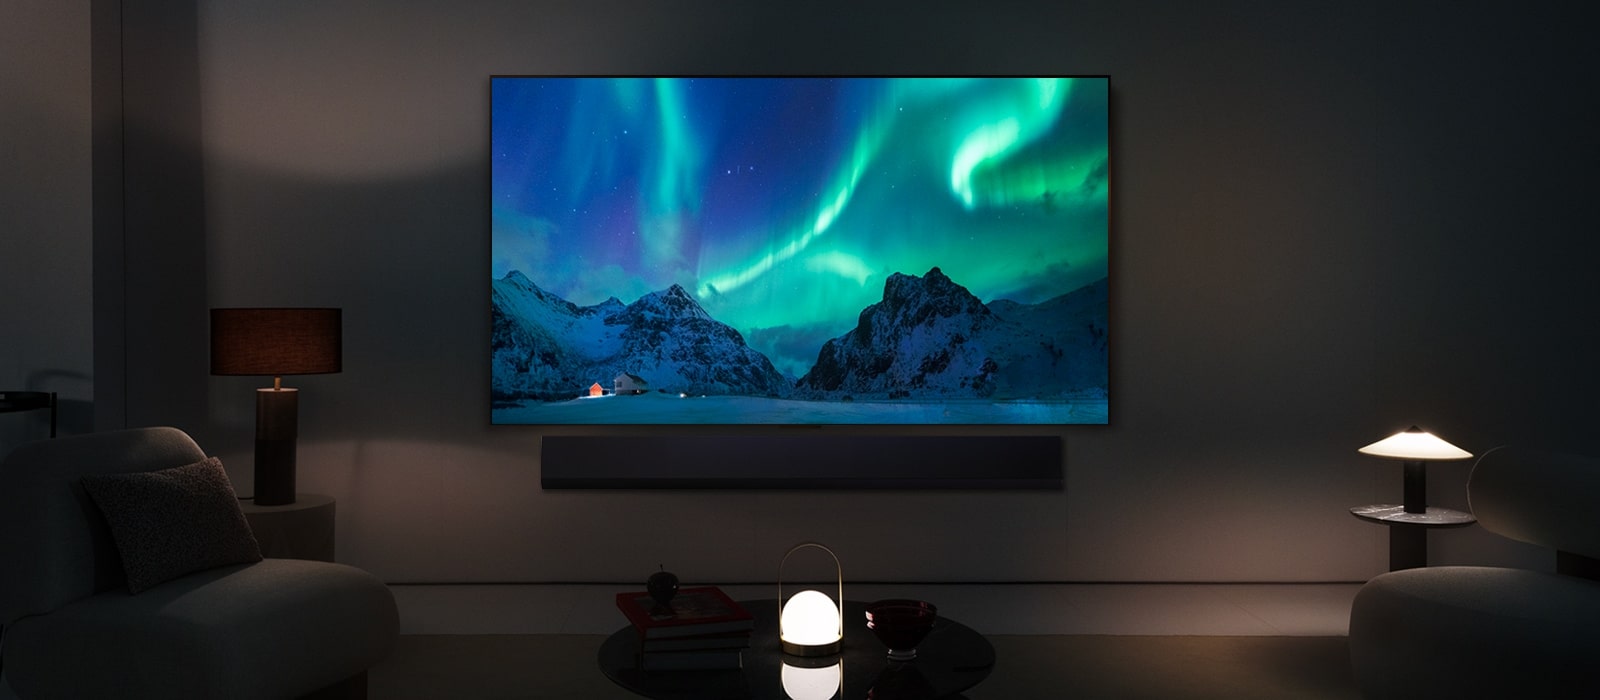 LG OLED TV and LG Soundbar in a modern living space in nighttime. The image of the aurora borealis is displayed with the ideal brightness levels.